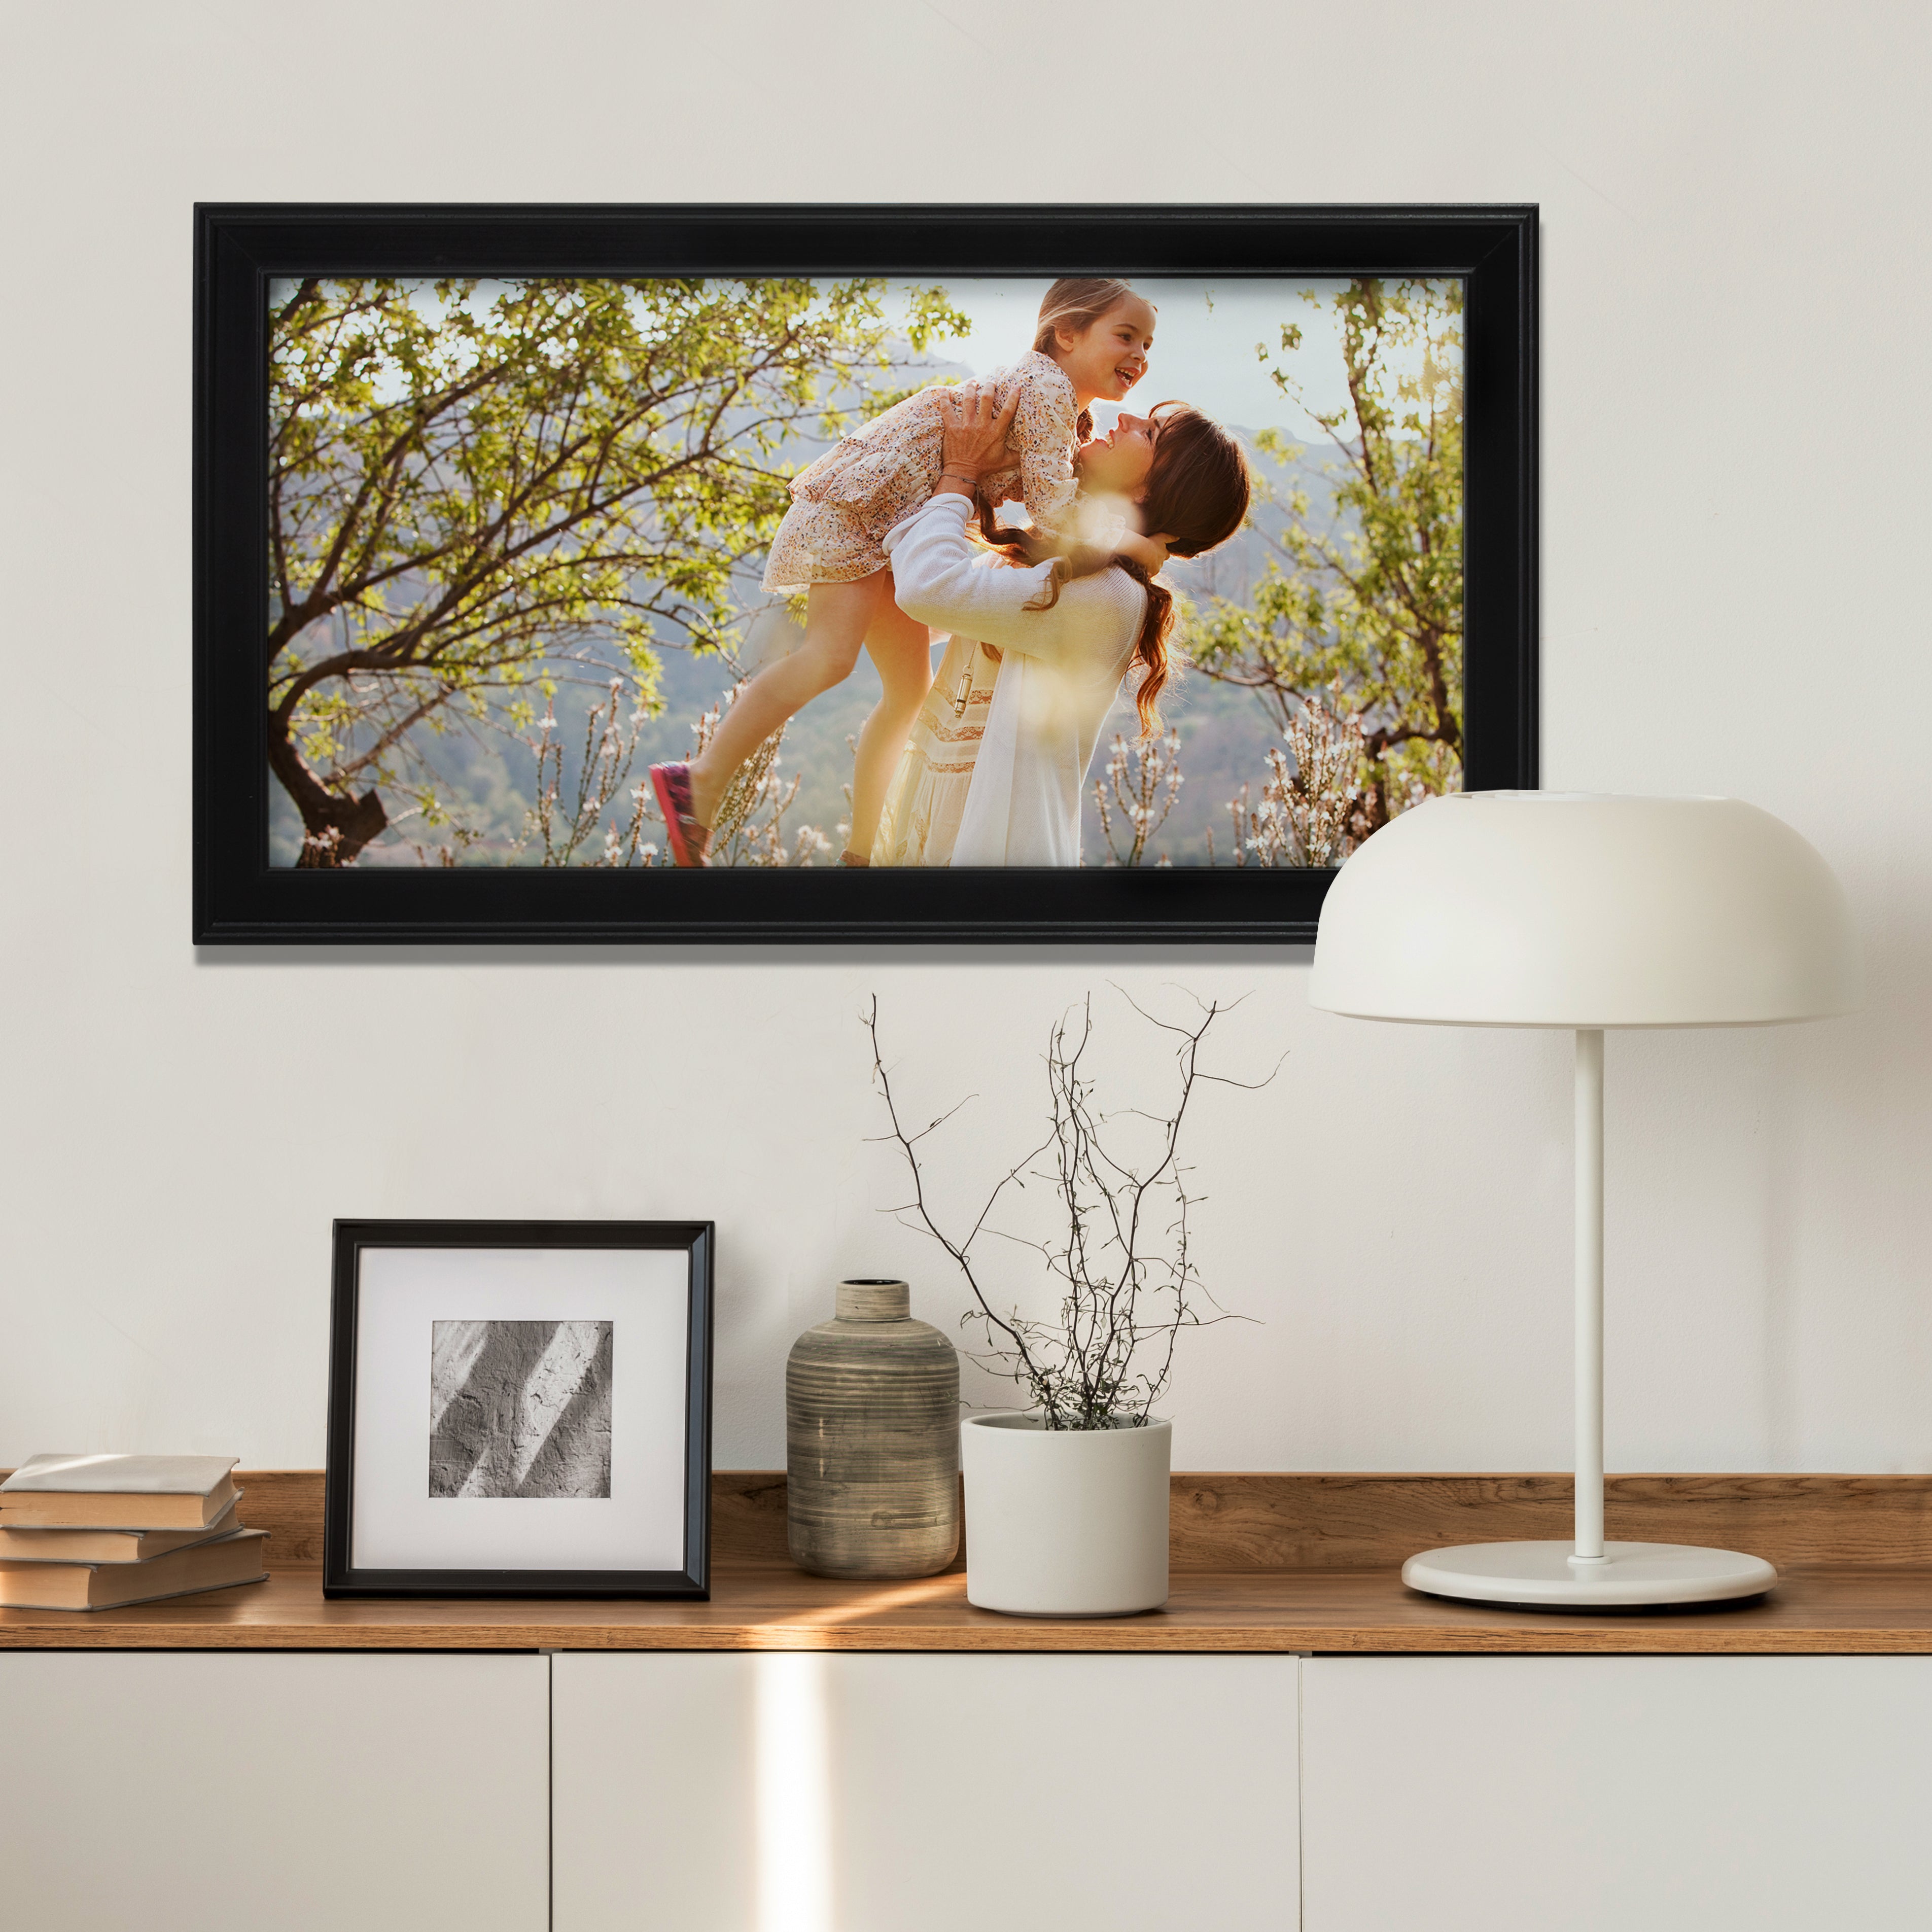 Traditional Panoramic Picture Frames